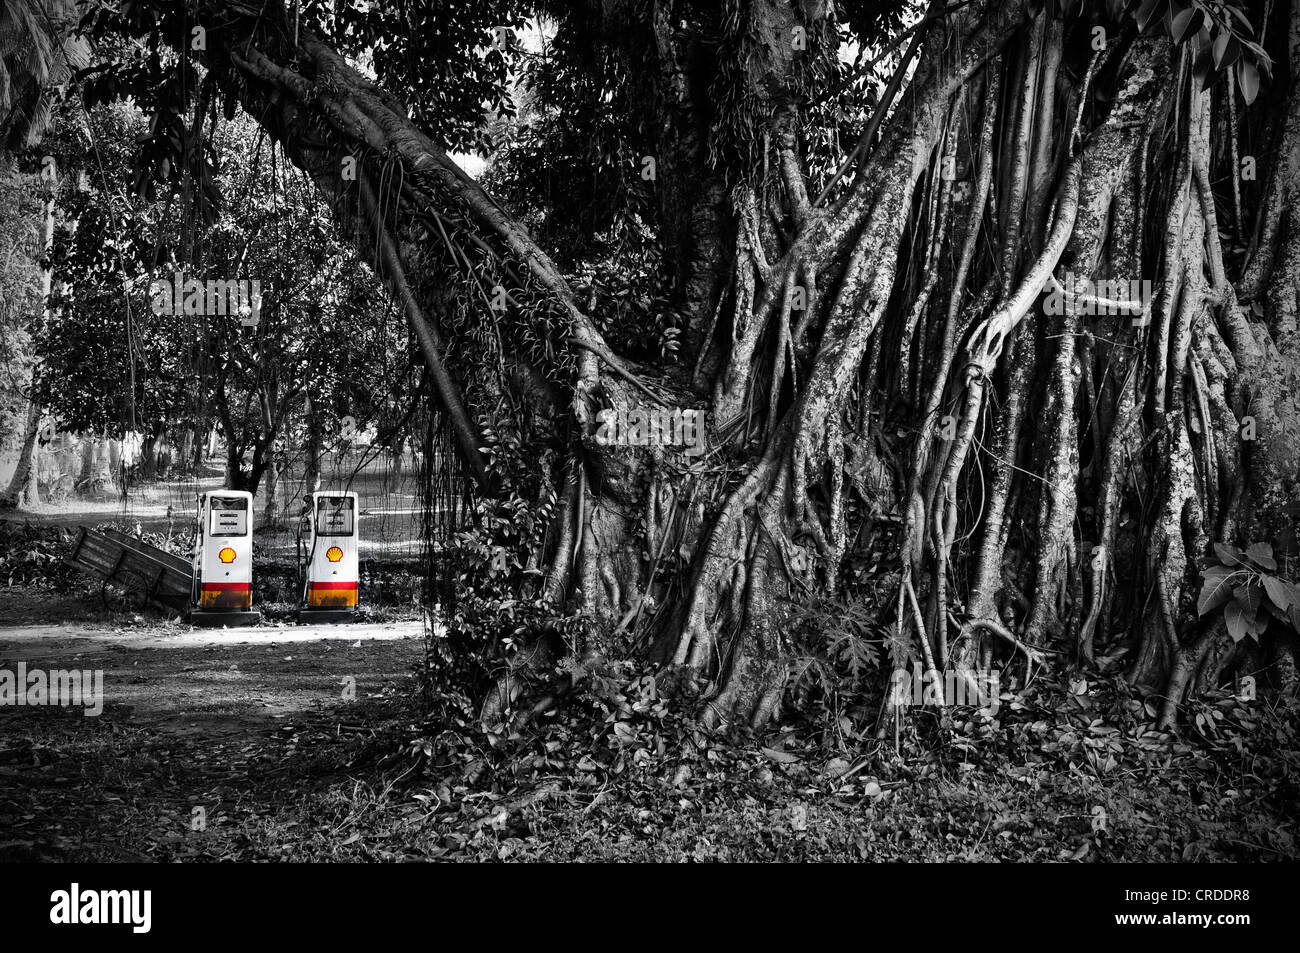 Shell petrol station in the jungle near Luang Prabang, Laos, Southeast Asia, Asia Stock Photo